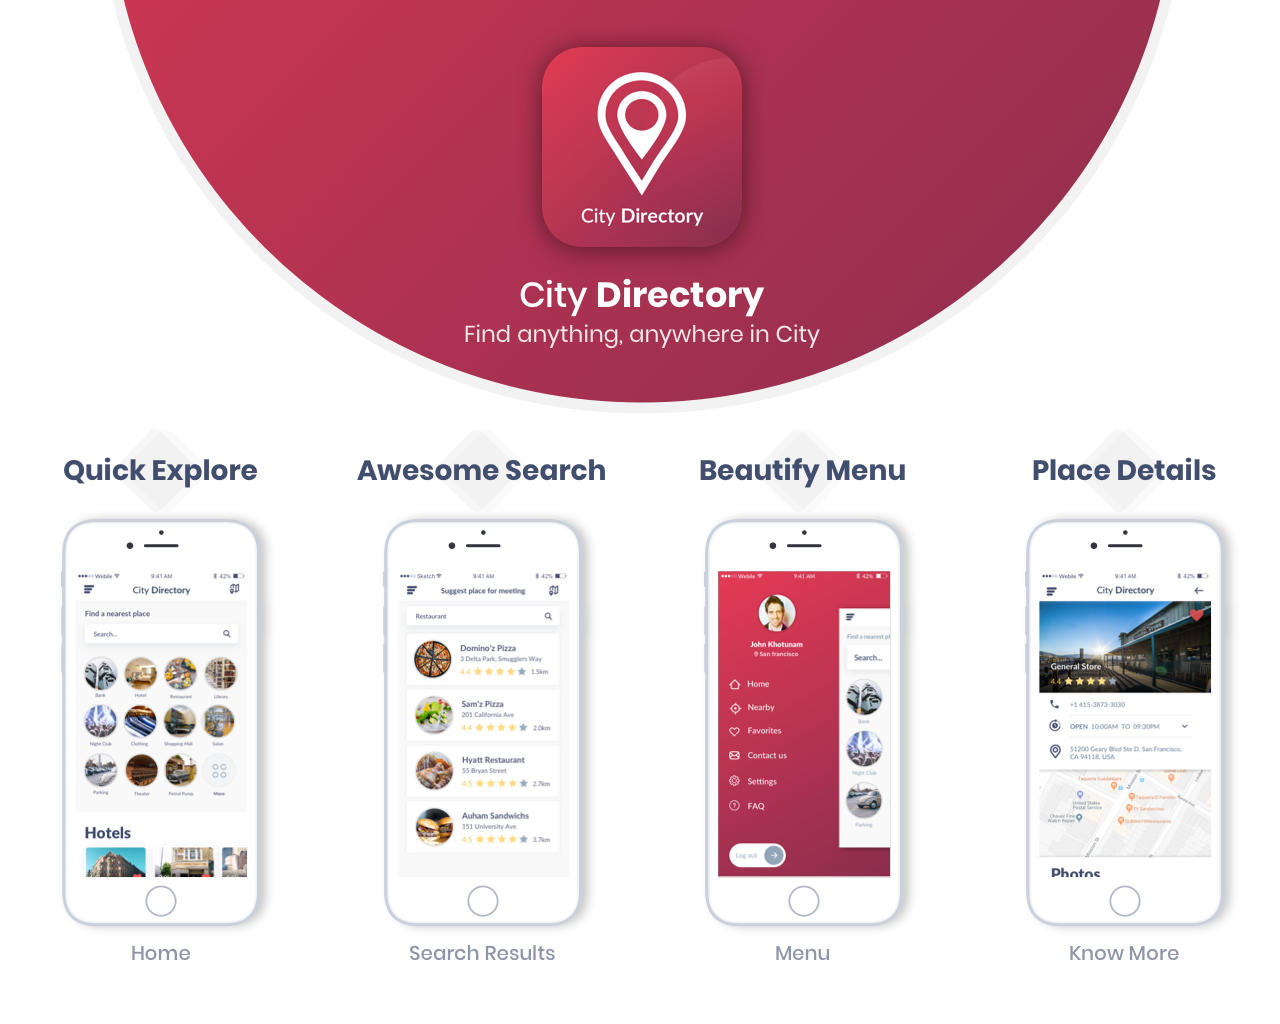 City Directory Android Native App Source Code Free 2018